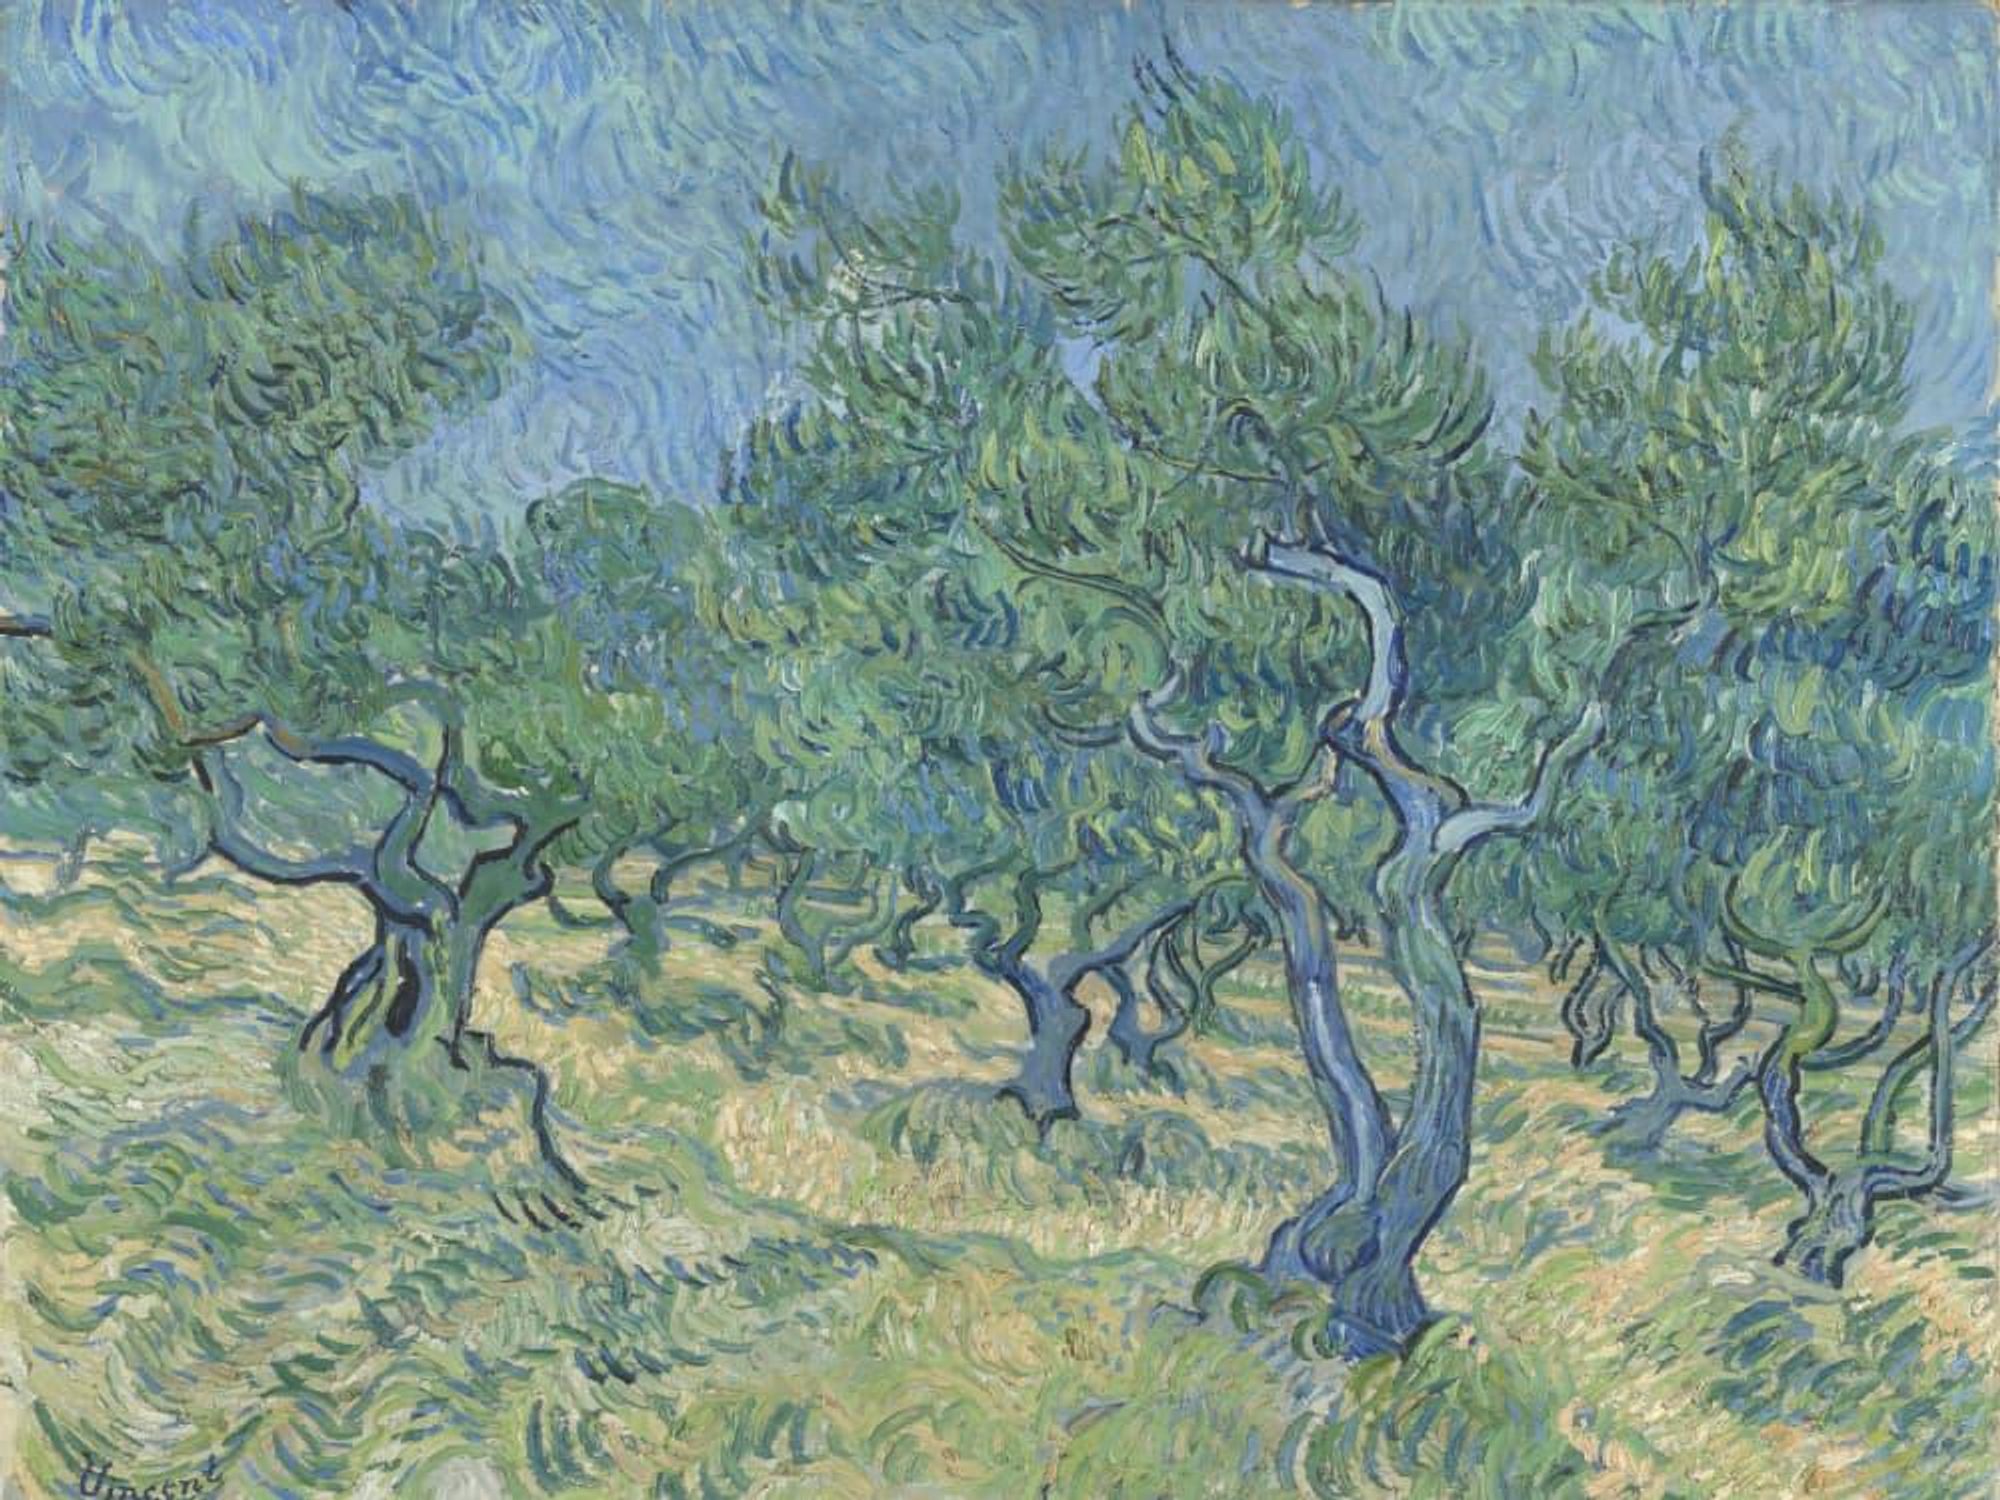 Dallas Museum of Art presents Van Gogh and the Olive Groves